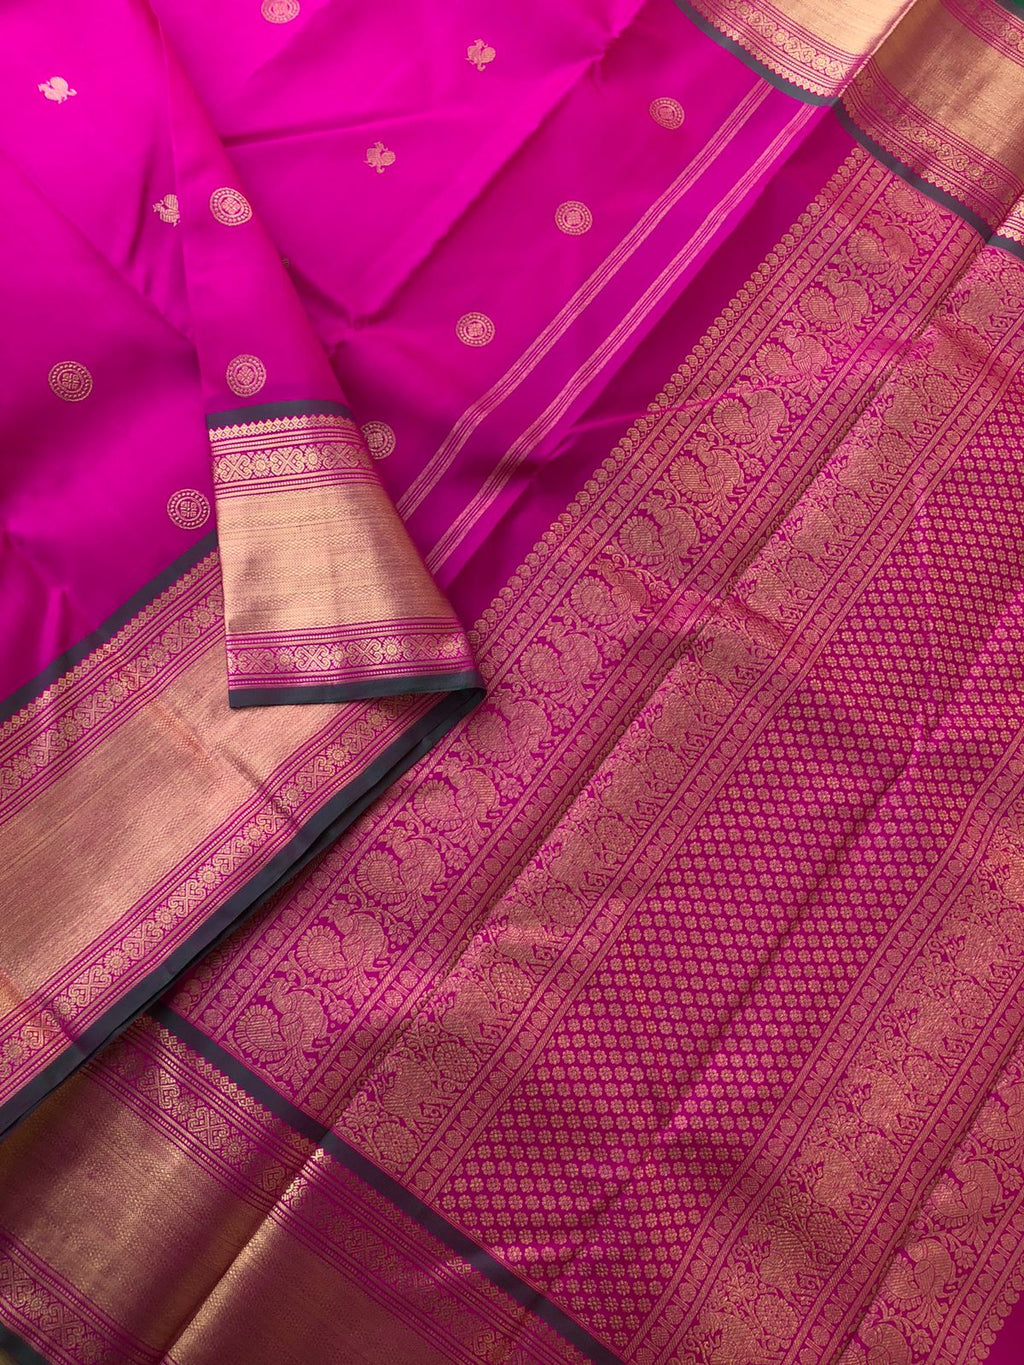 Leela - Legacy Of Kanchivarams - the traditional deep pink and solid gold Kanchivaram comes with Meenakshi green blouse